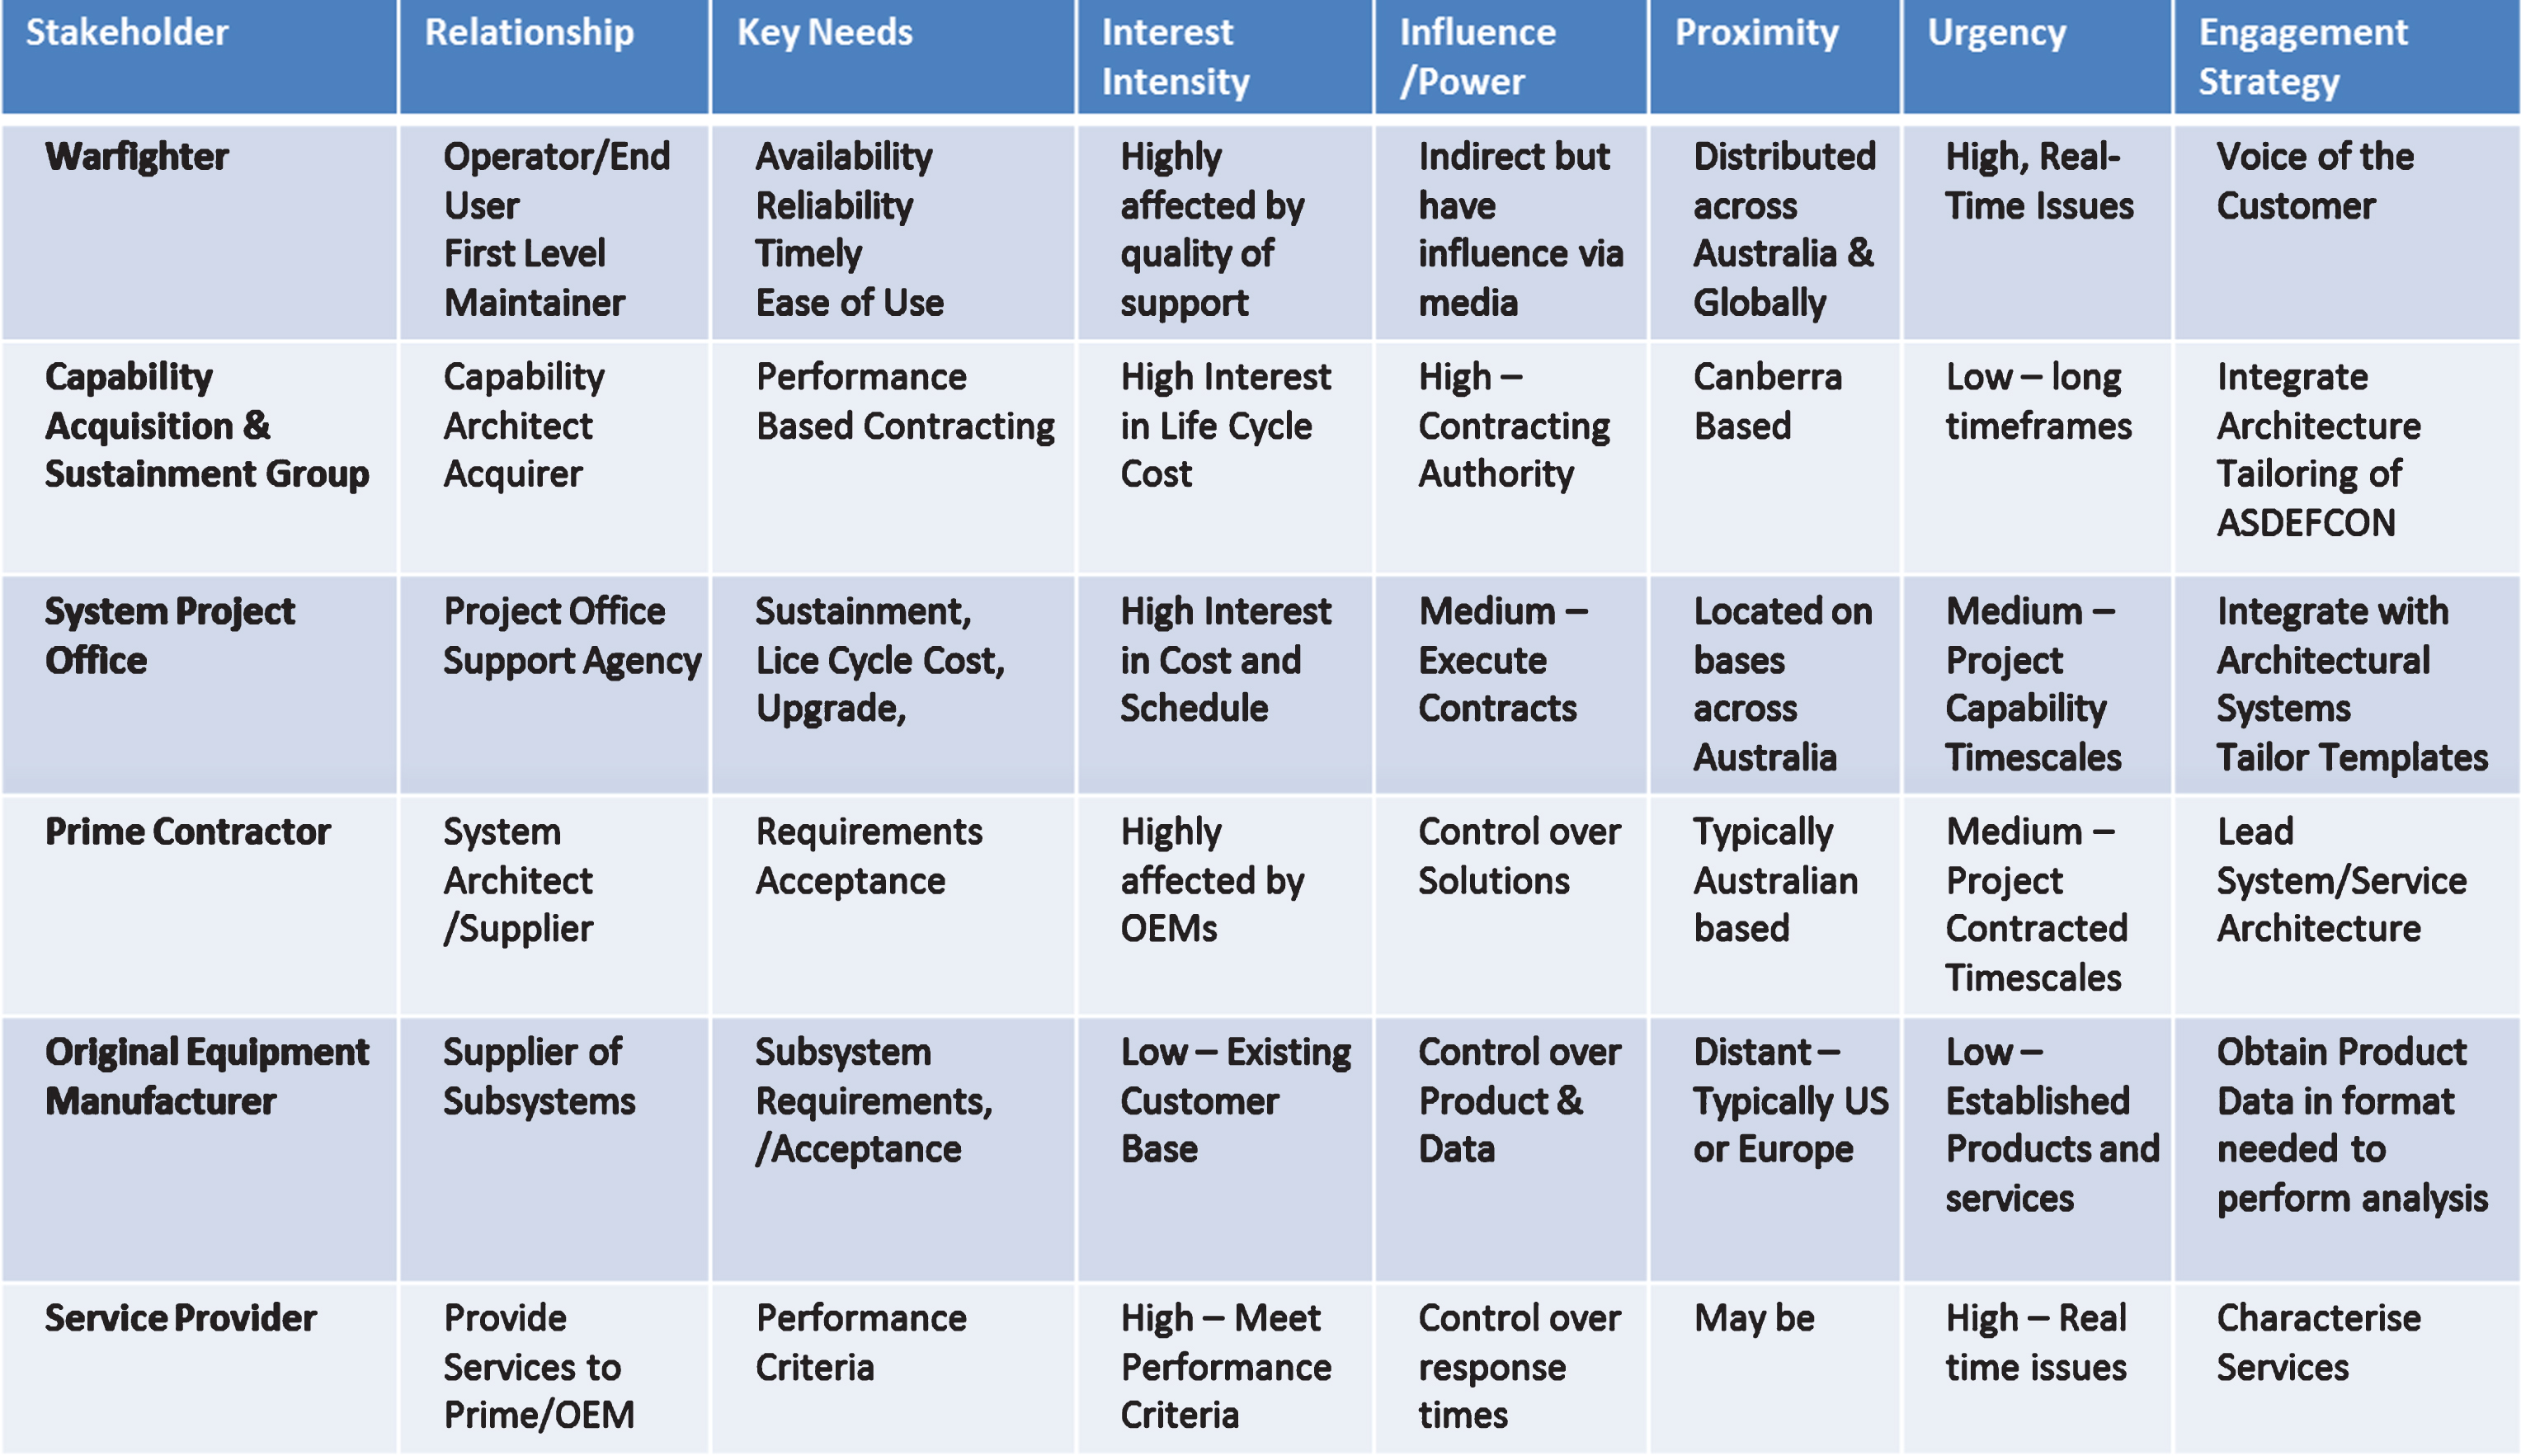 Stakeholder Engagement Analysis (Source: created by authors).